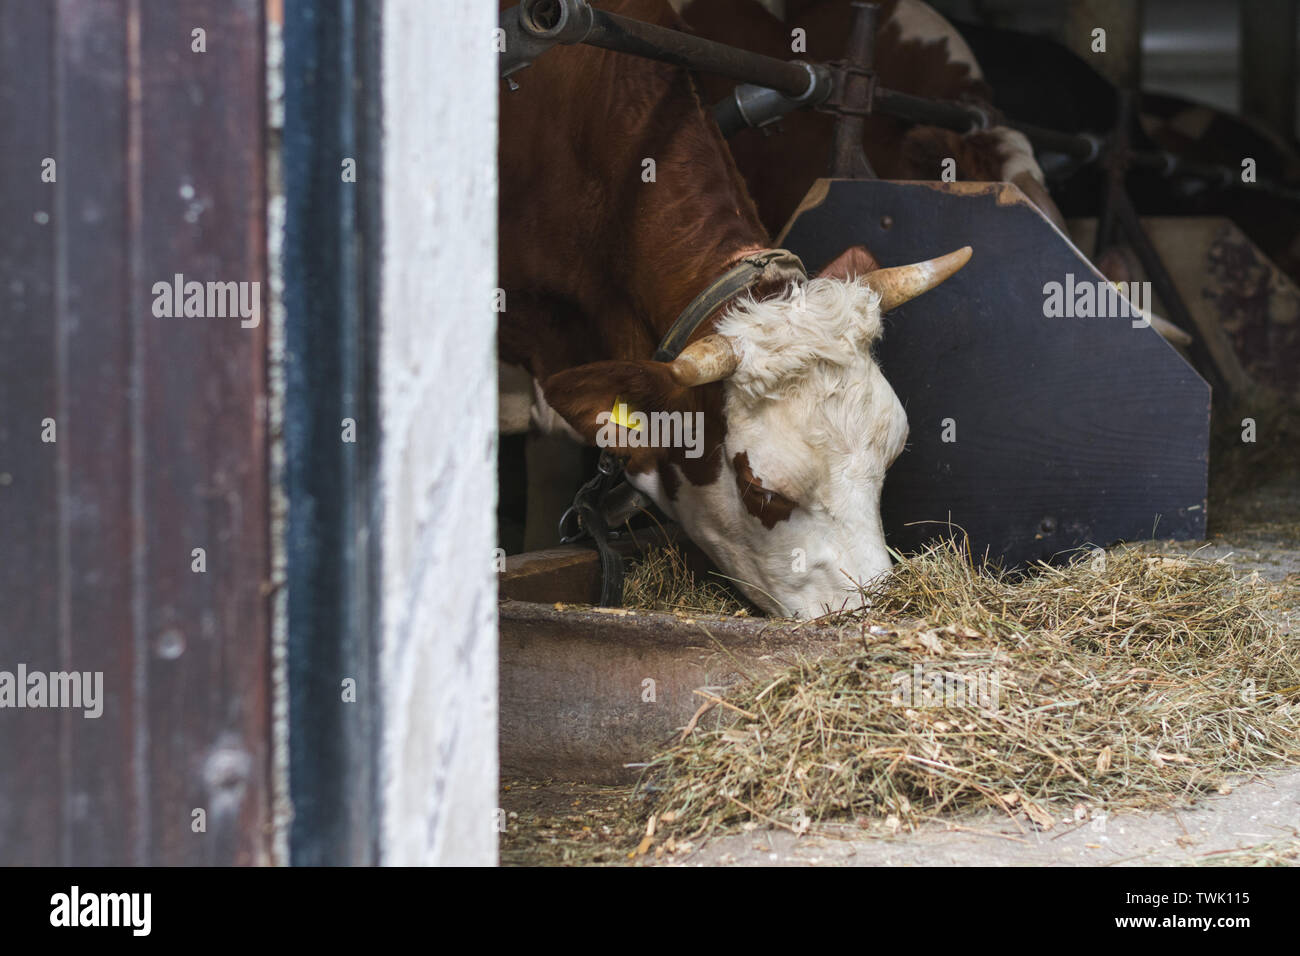 Simmental cow feeding in the cattle barn Stock Photo